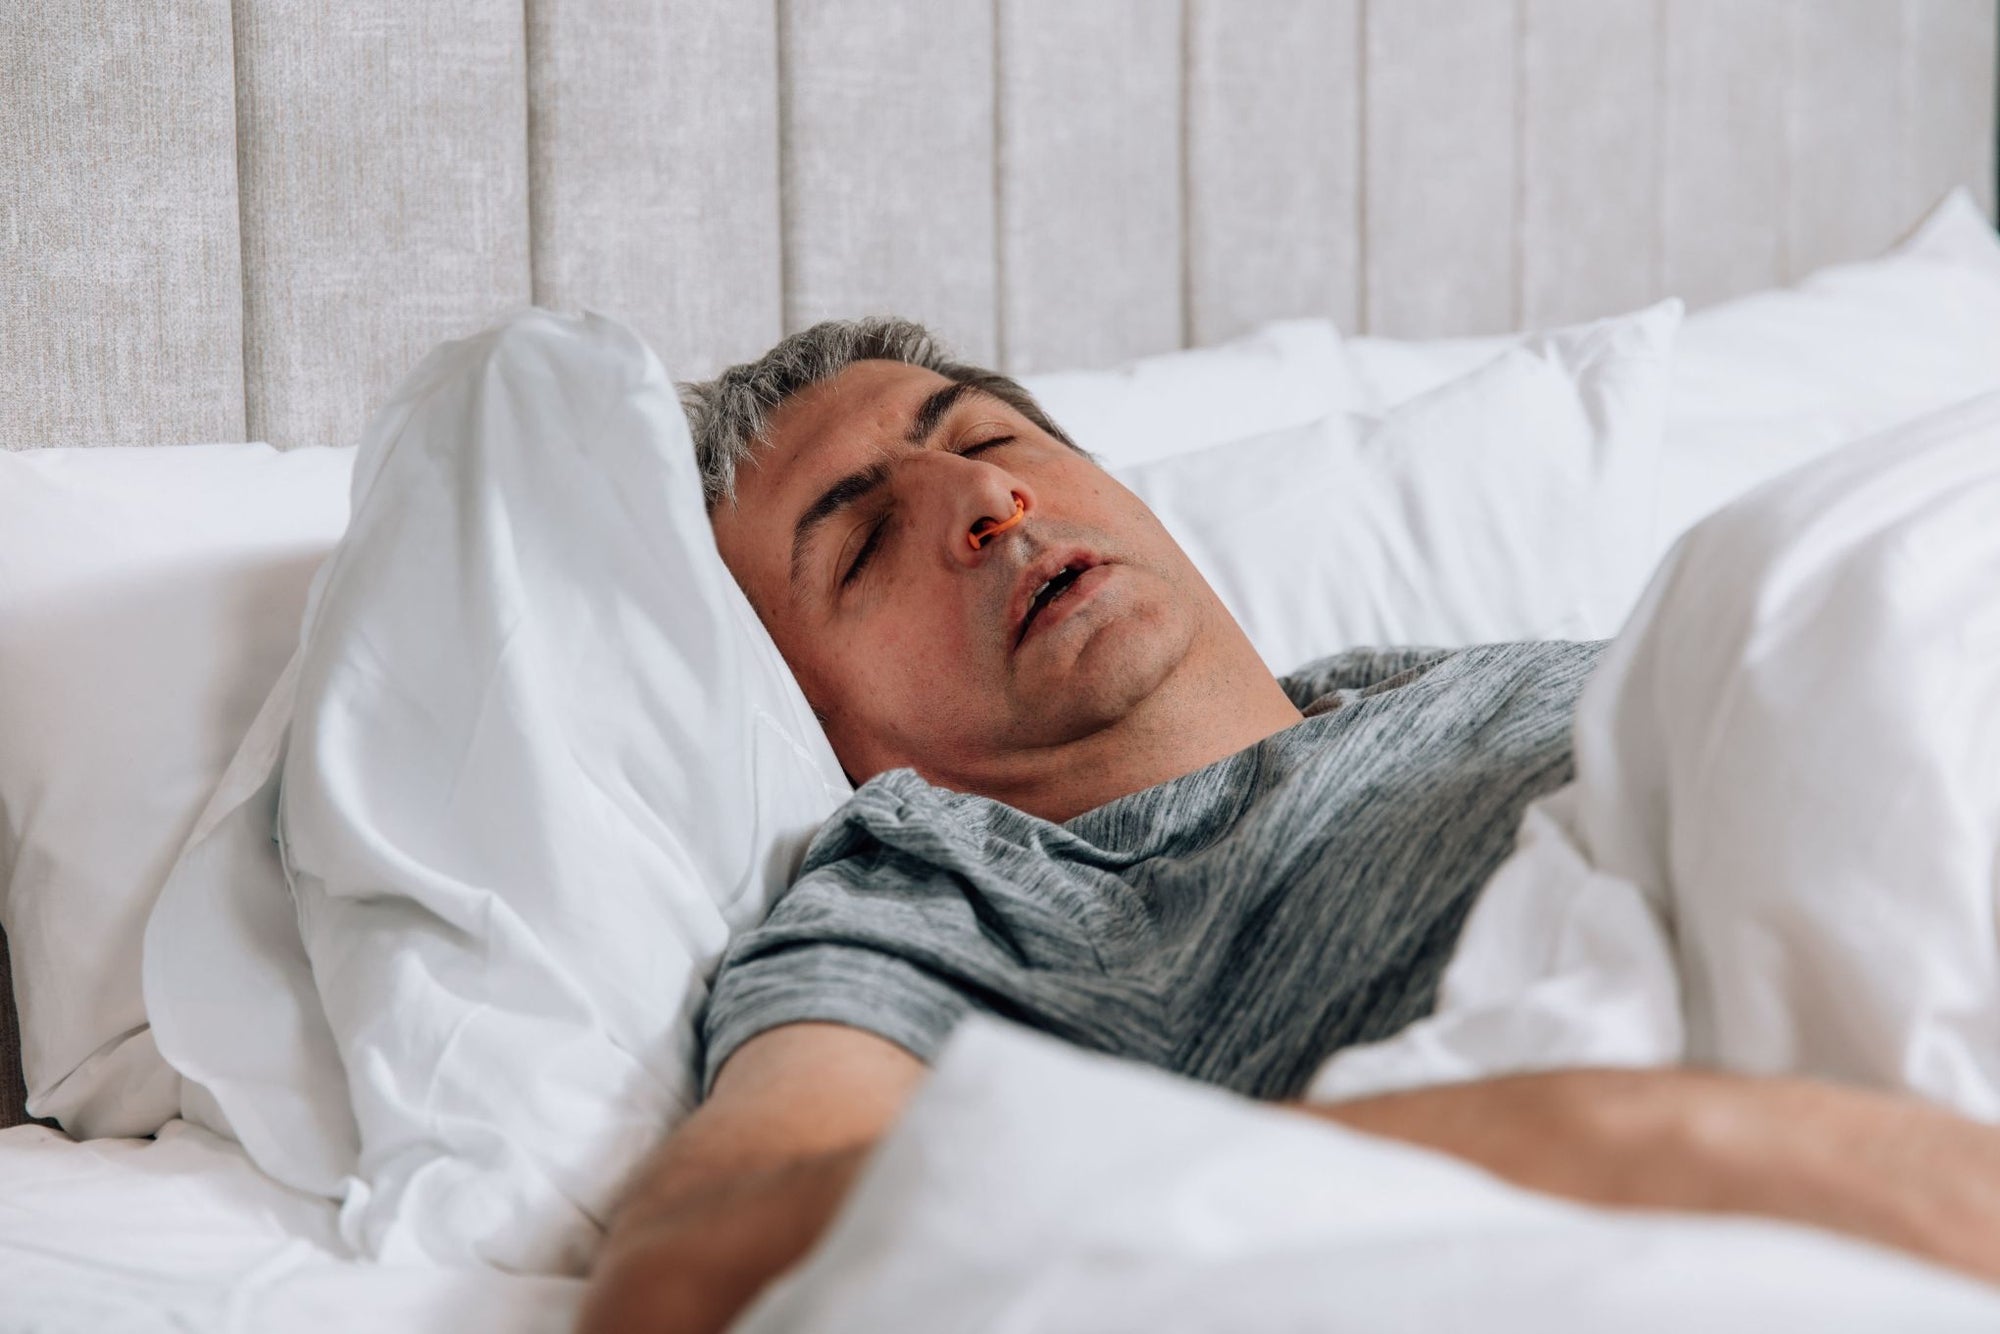 Can't Control Mouth Breathing When Sleeping? 3 Tips To Help